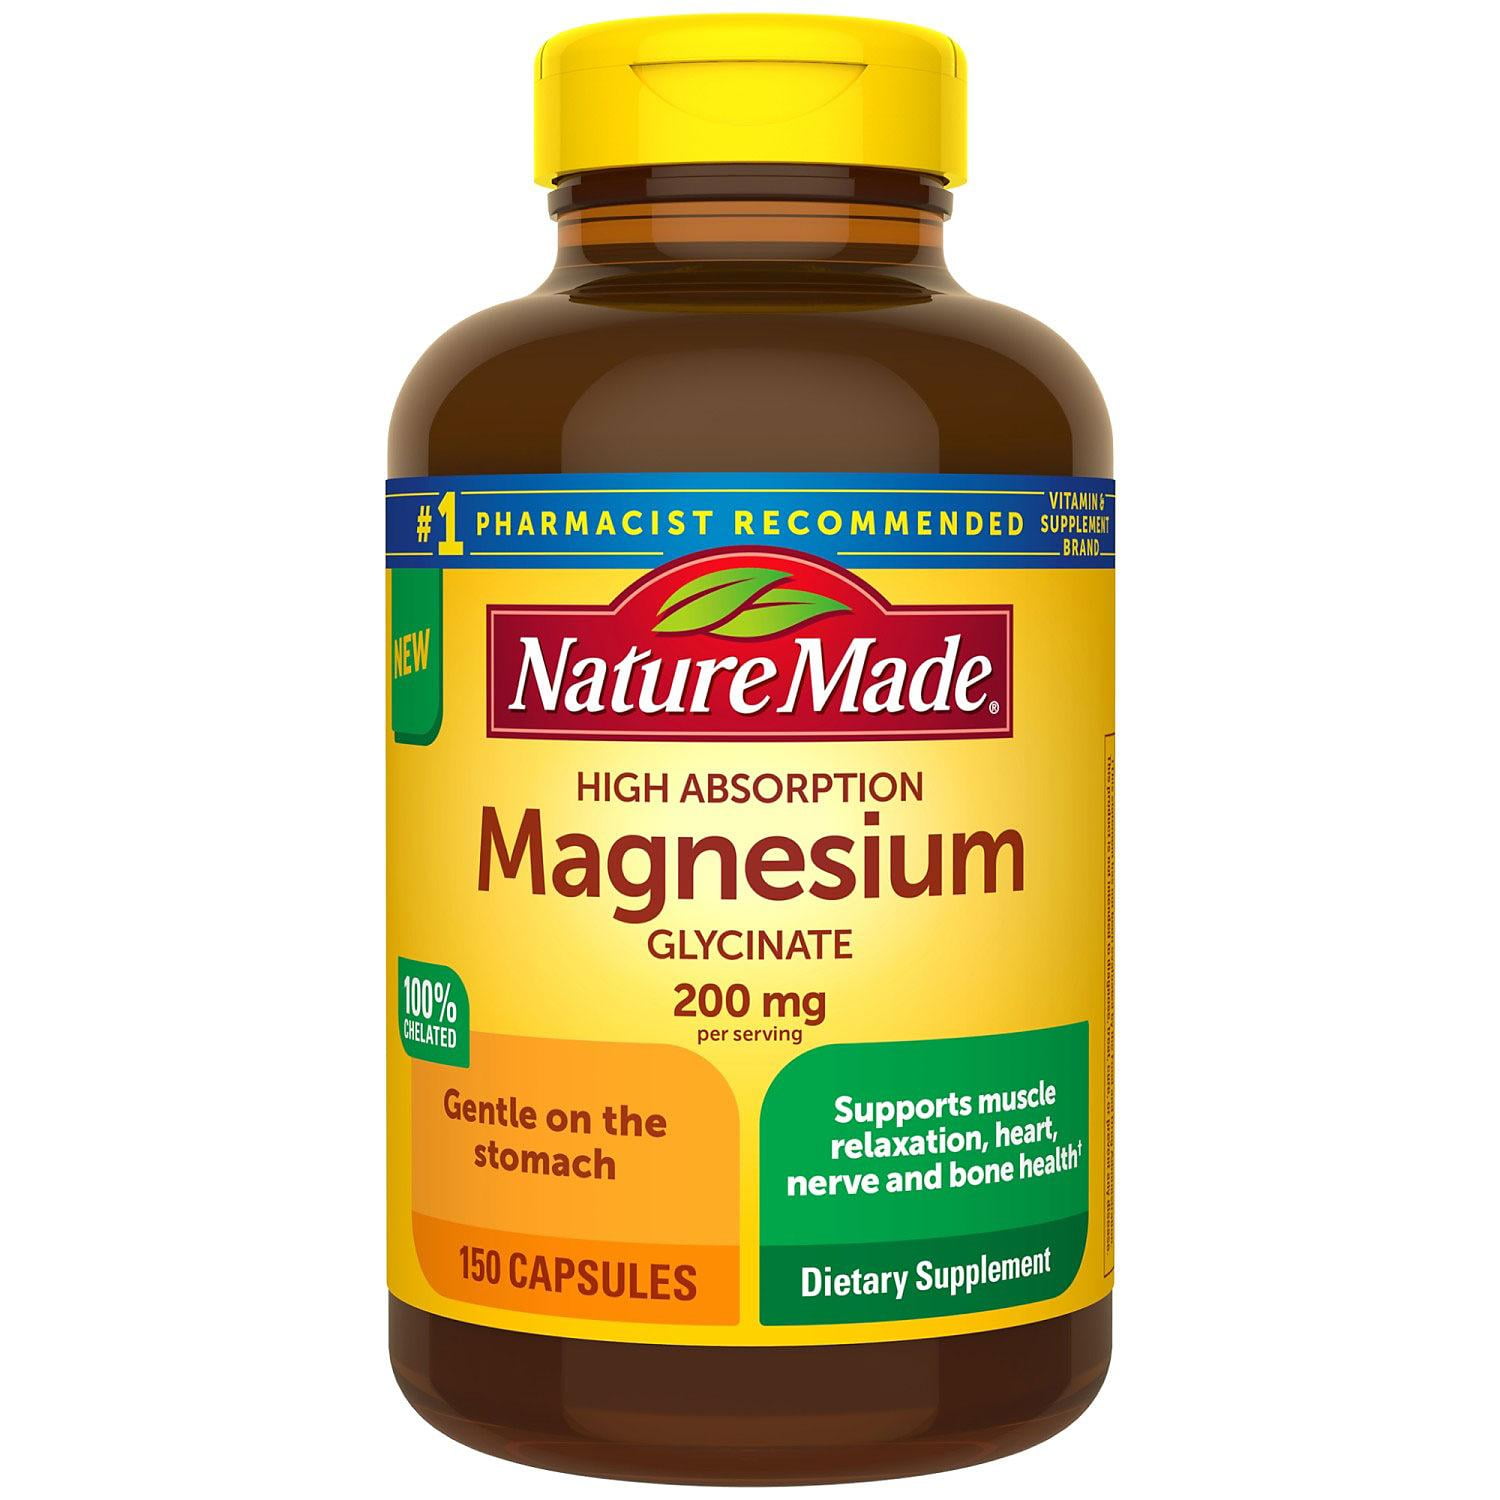 The Nature Made Magnesium Glycinate 200 mg Capsules, for.